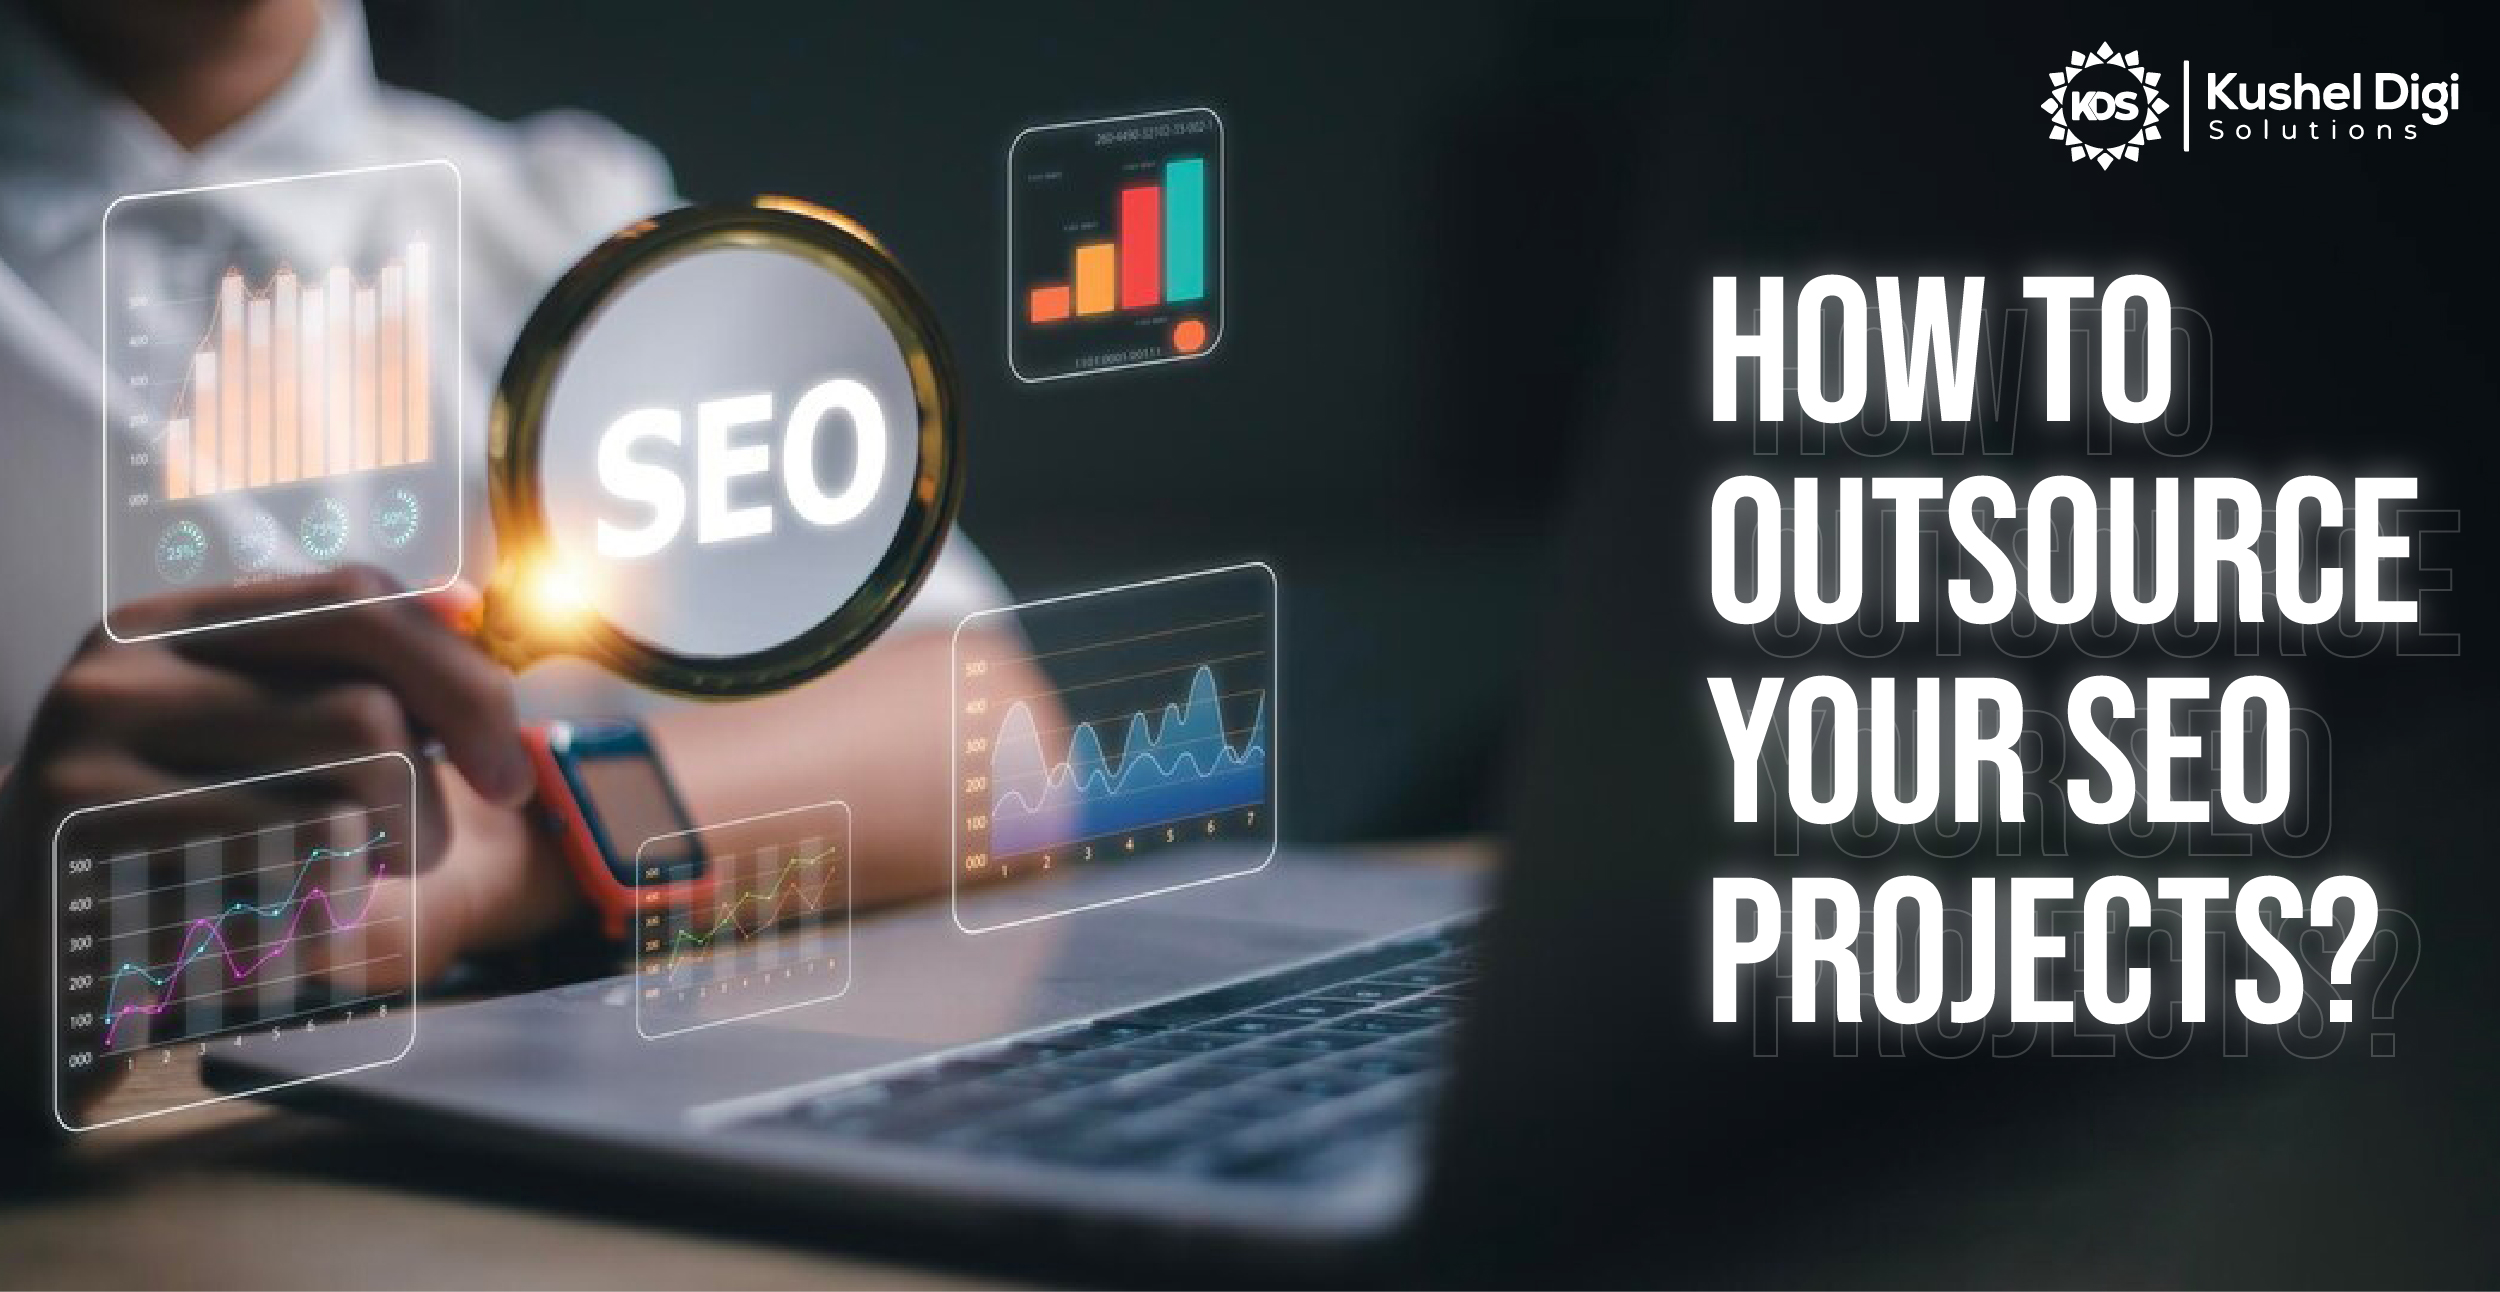 HOW TO OUTSOURCE YOUR SEO PROJECTS 